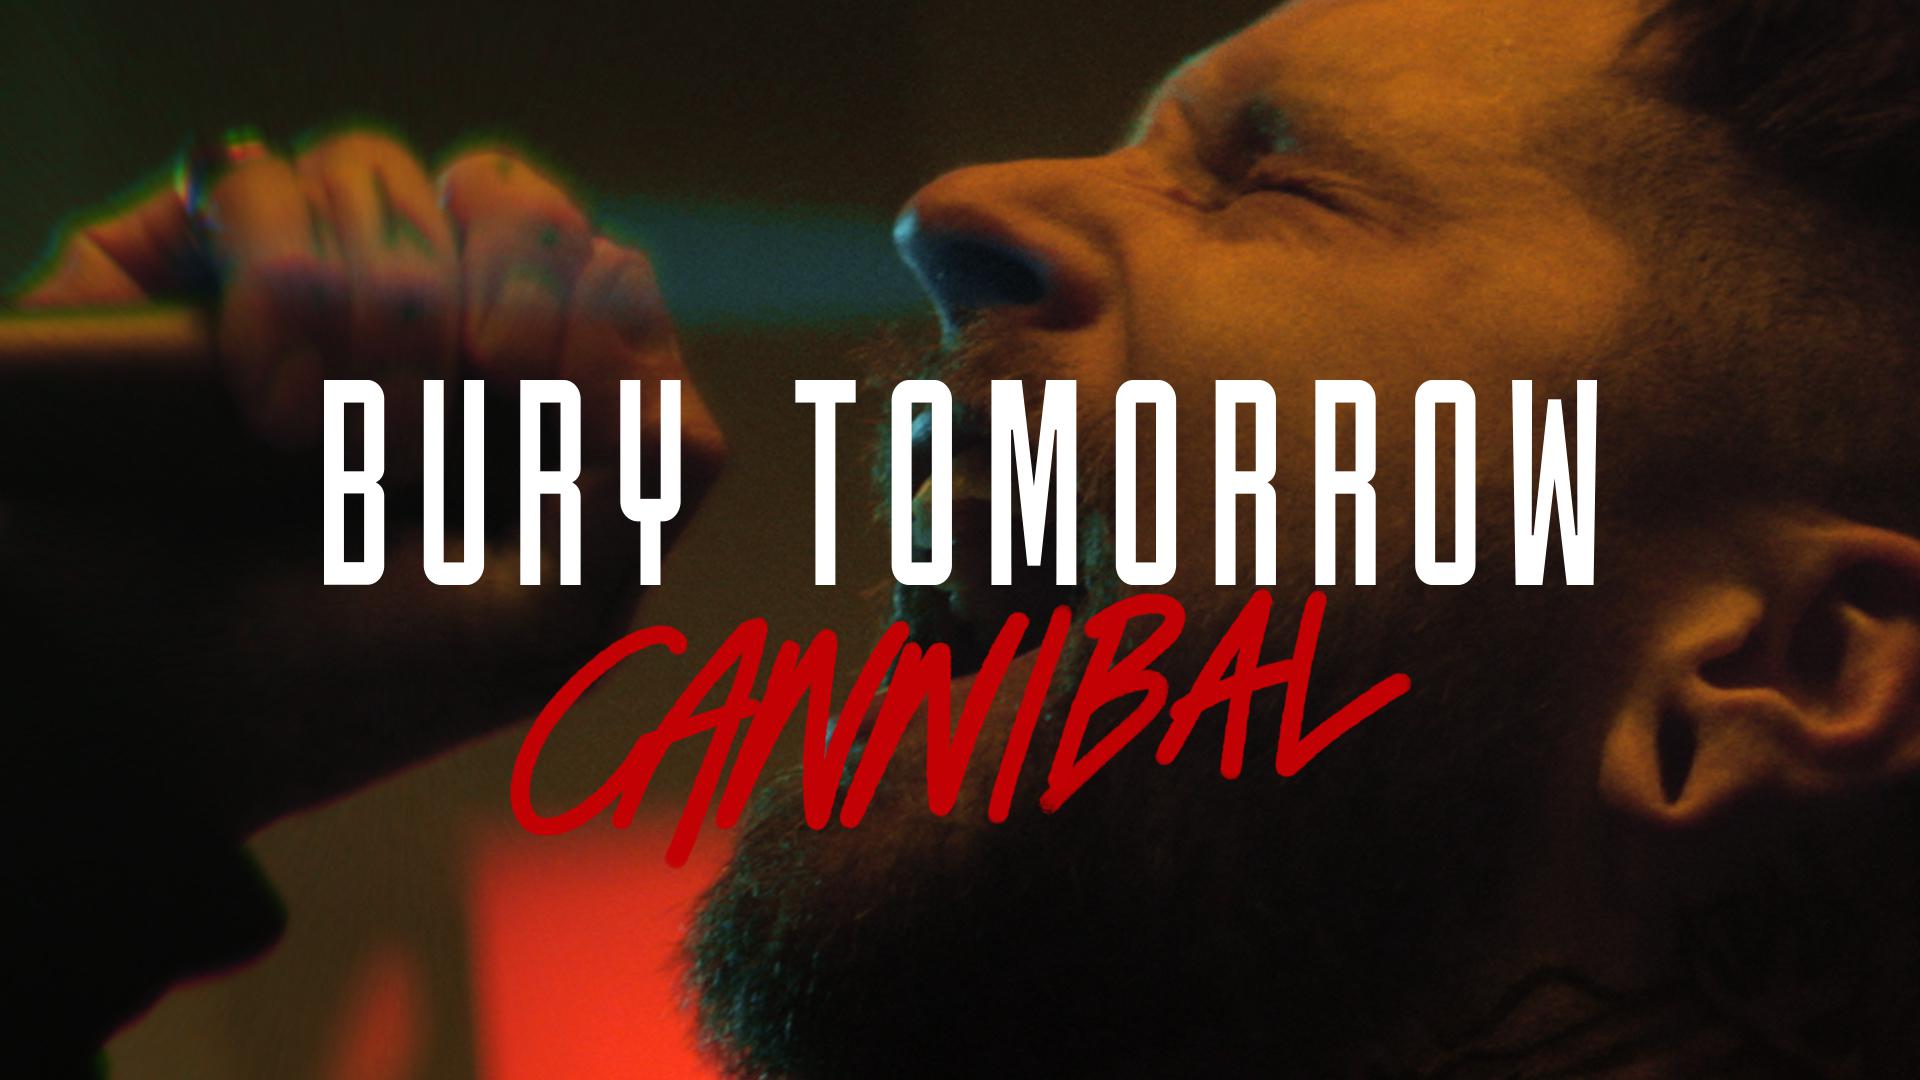 Bury Tomorrow - Cannibal (Official Video)